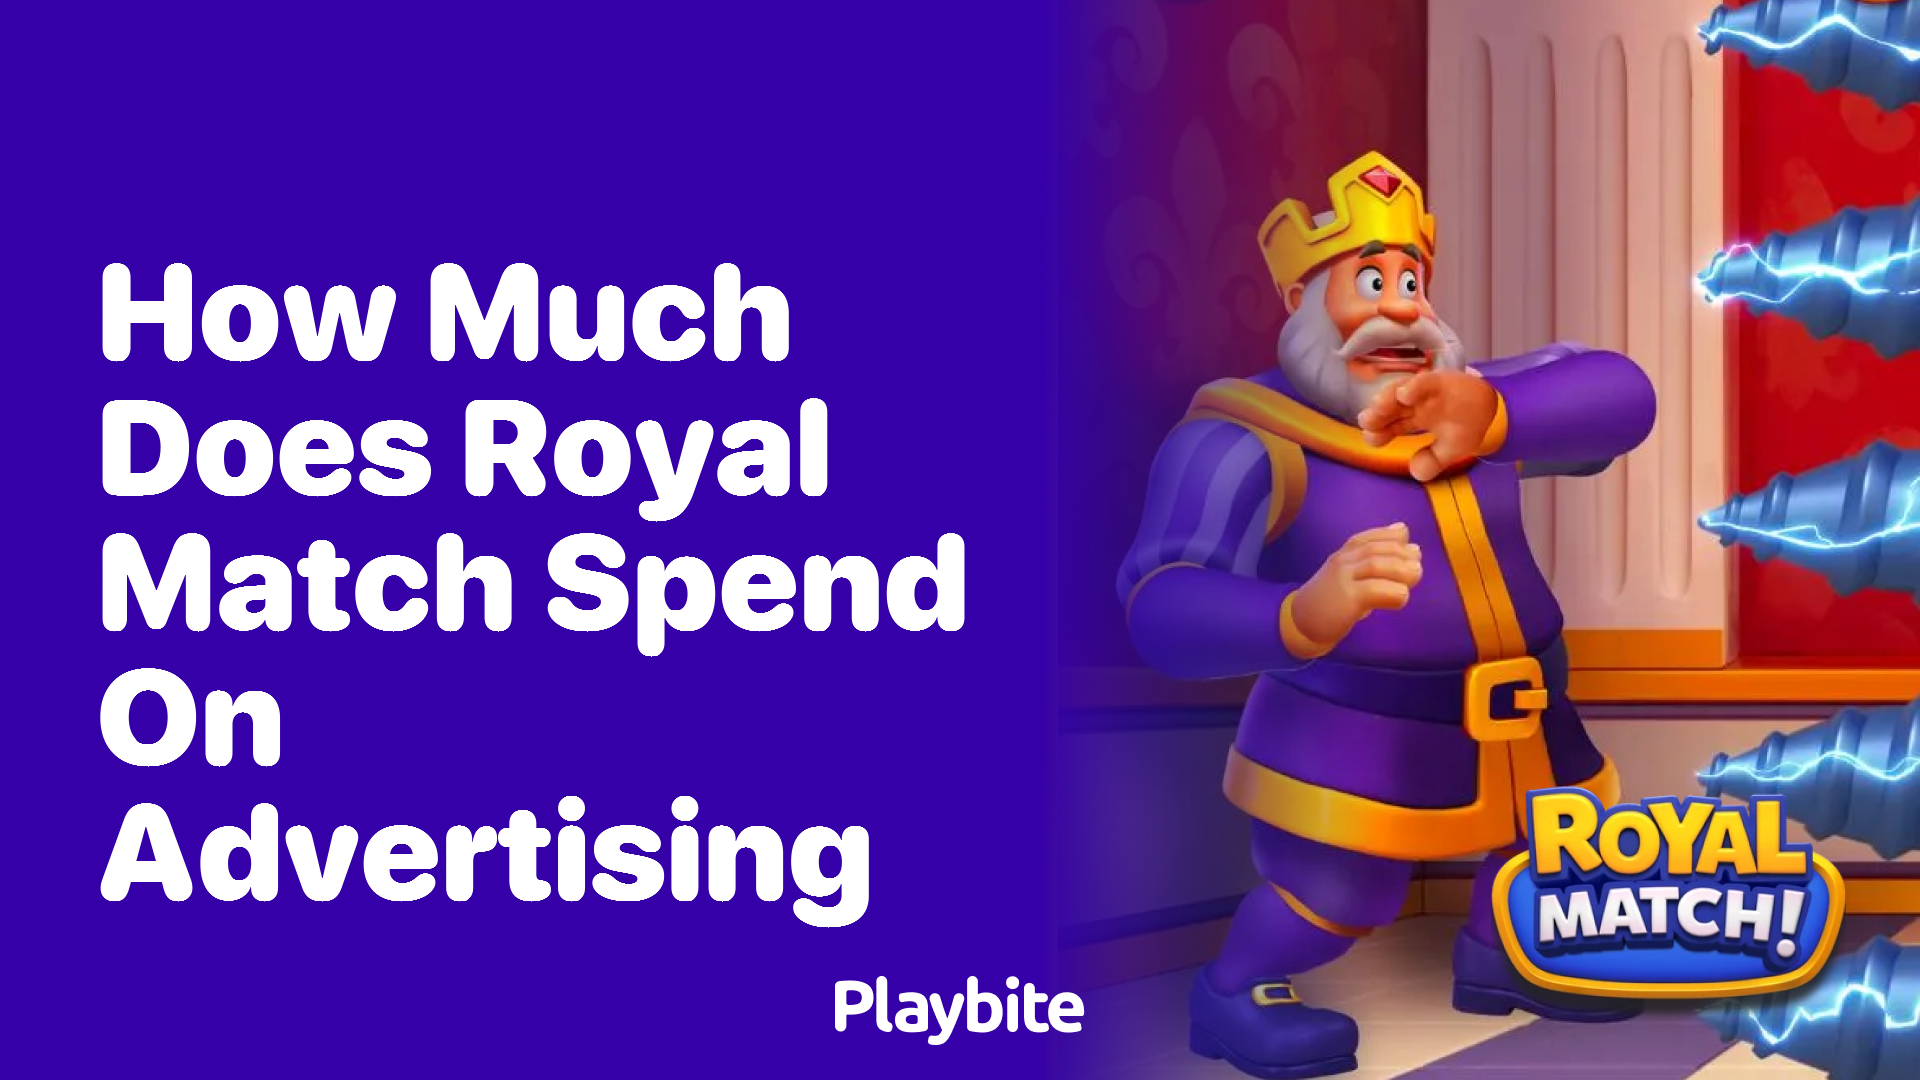 How Much Does Royal Match Spend on Advertising?